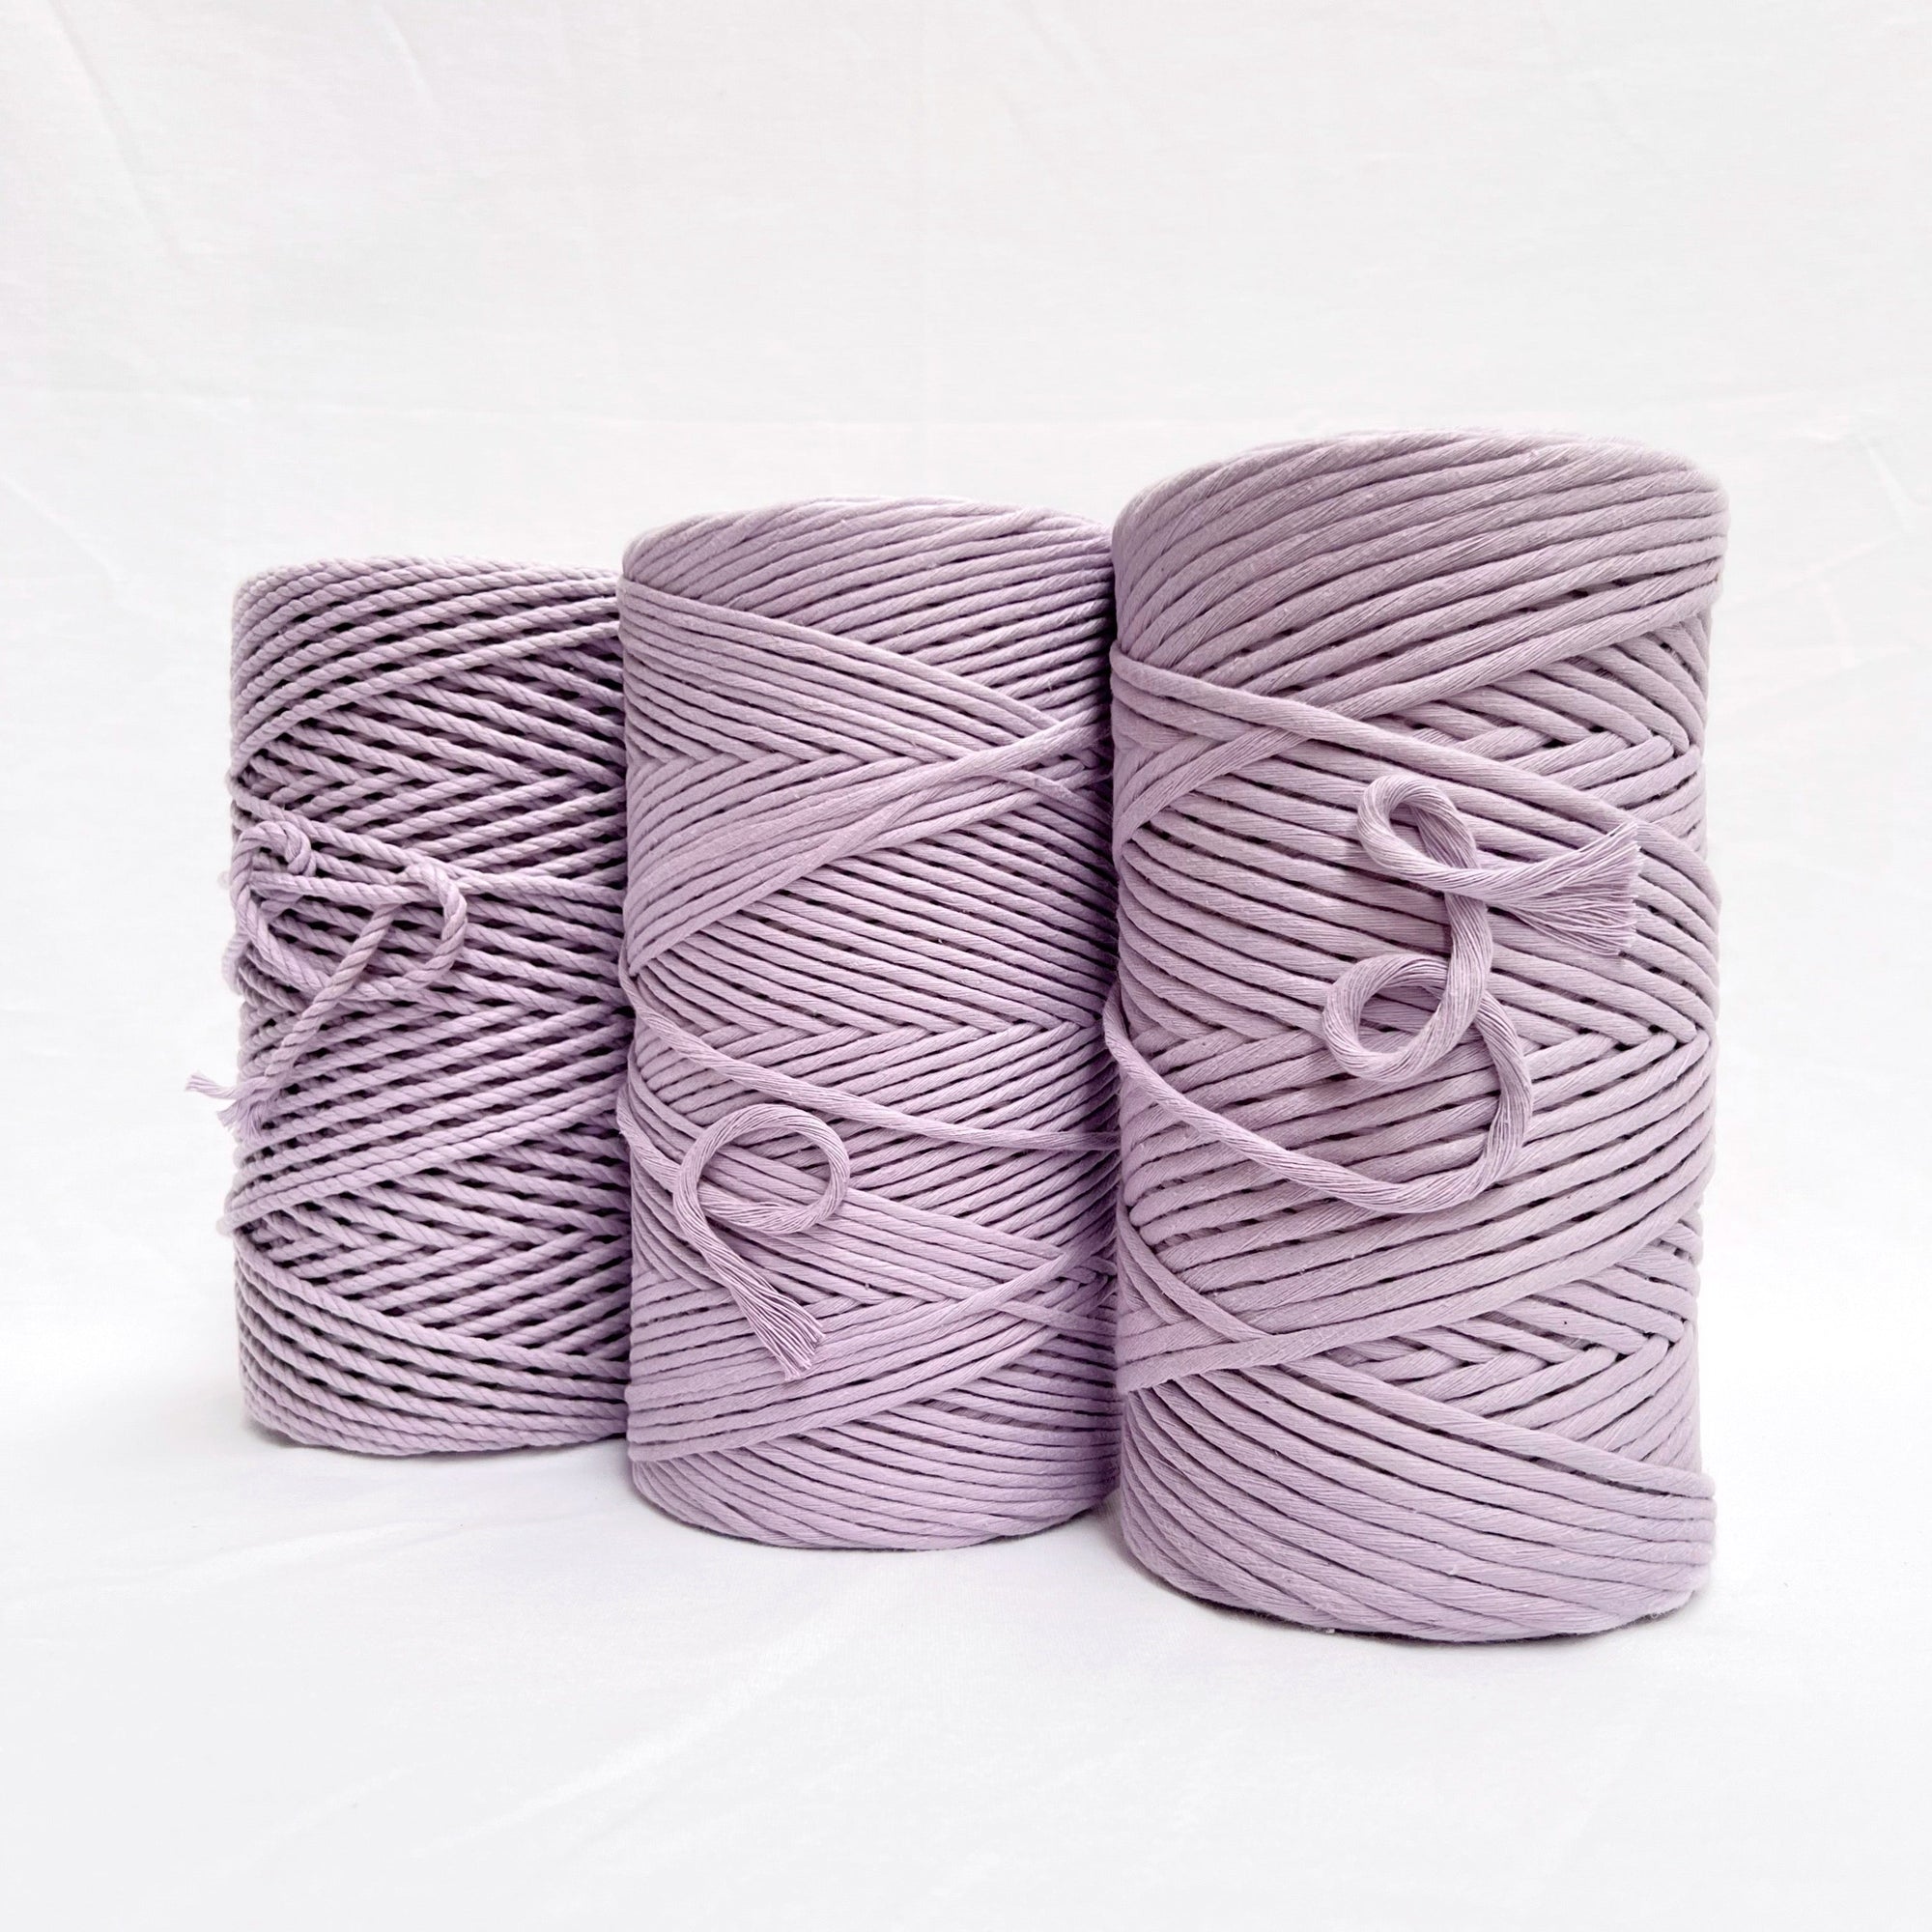 mary maker studio 1kg 4mm recycled cotton macrame rope in iced lilac purple colour suitable for macrame workshops beginners and advanced artists